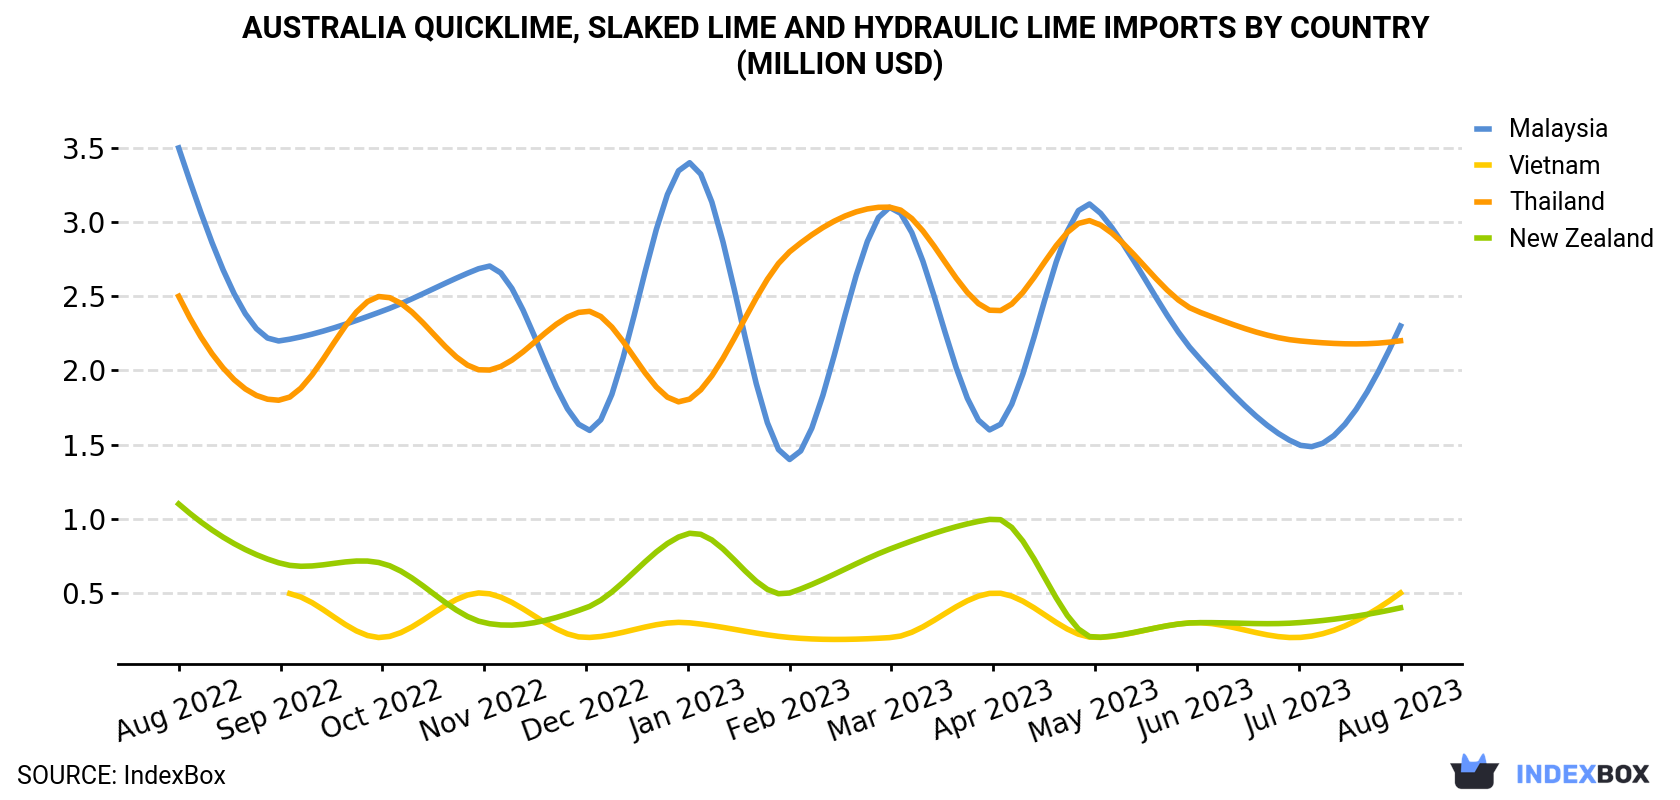 Australia Quicklime, Slaked Lime And Hydraulic Lime Imports By Country (Million USD)